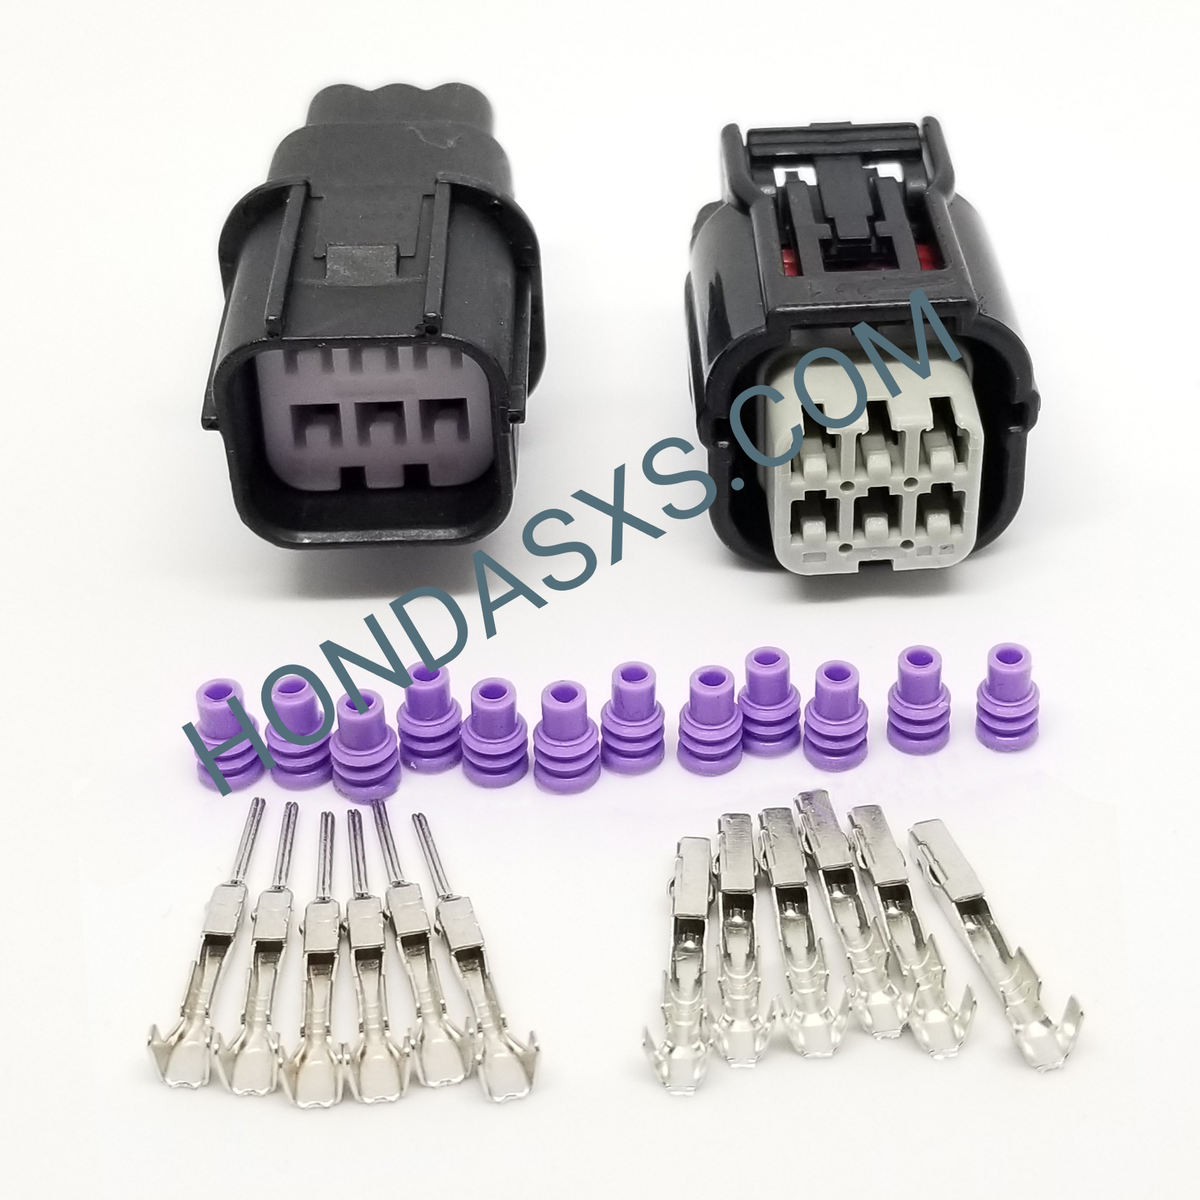 HVG 6 Pin Male &amp; Female Plug Connector Set for Honda UTV, SxS, ATV. Wire connector with Terminals and seals.